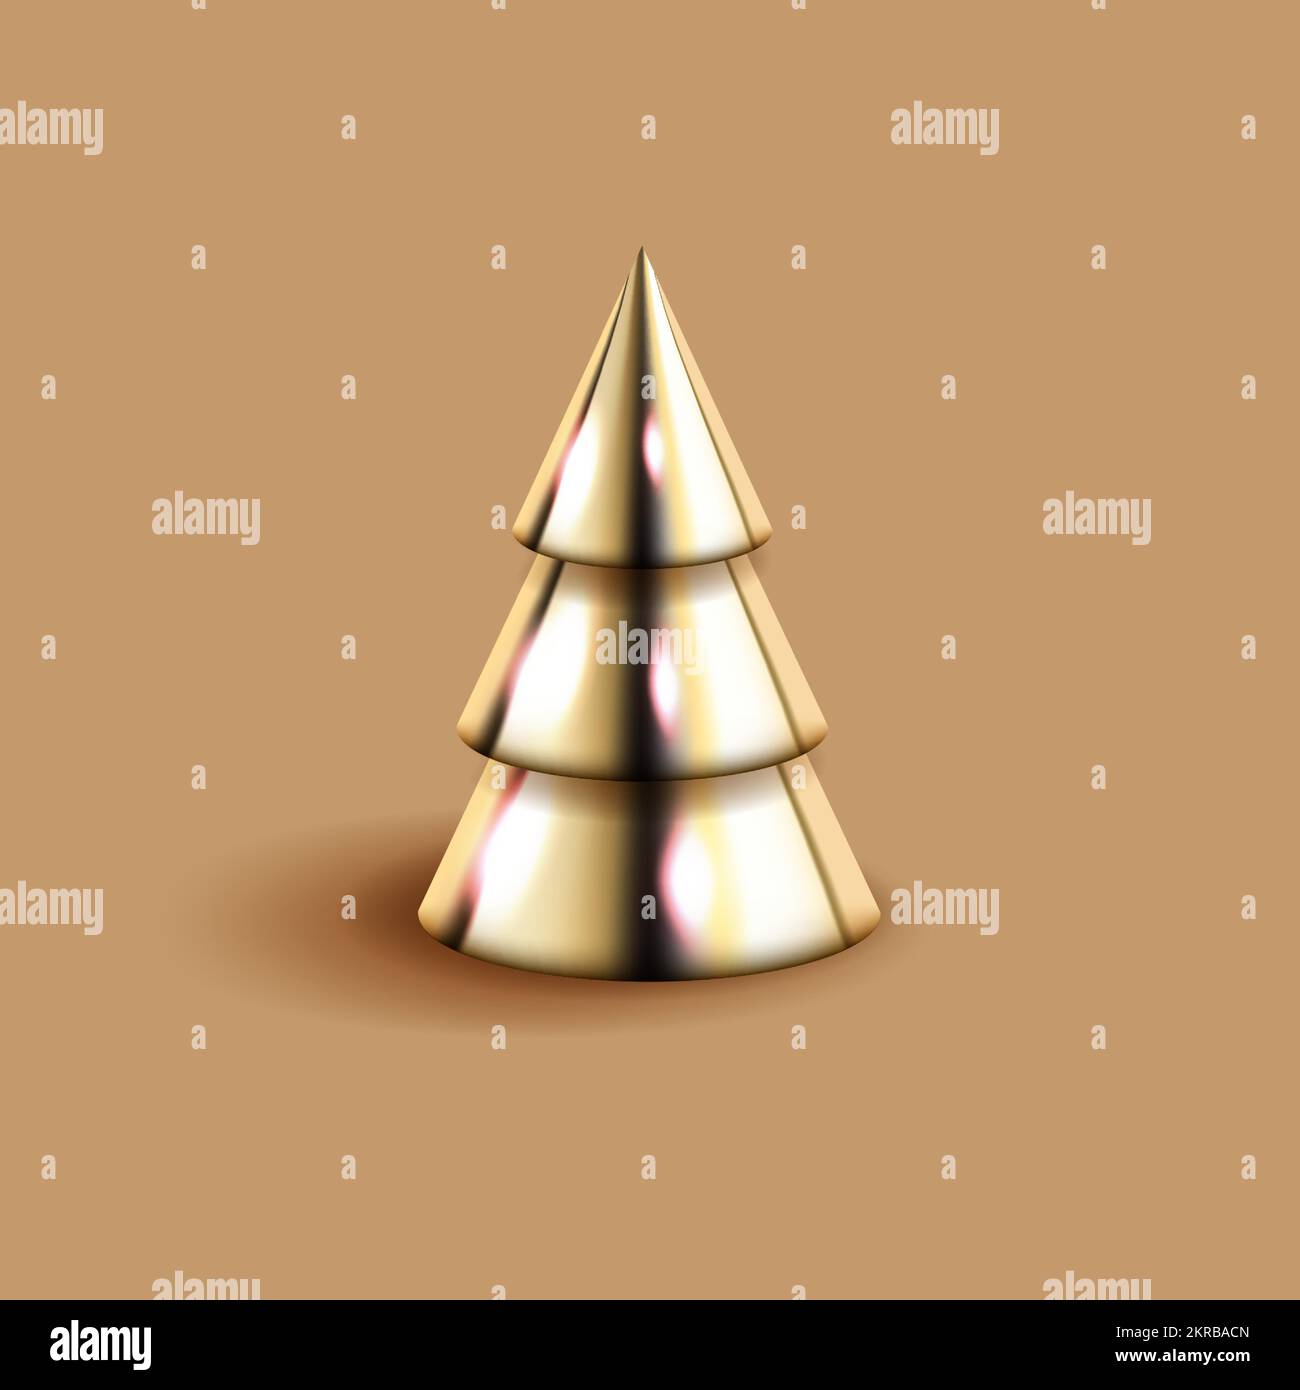 Golden 3D geometric Christmas tree on brown background. Shiny metal decoration element. Decorative mathematical figure vector illustration in Stock Vector